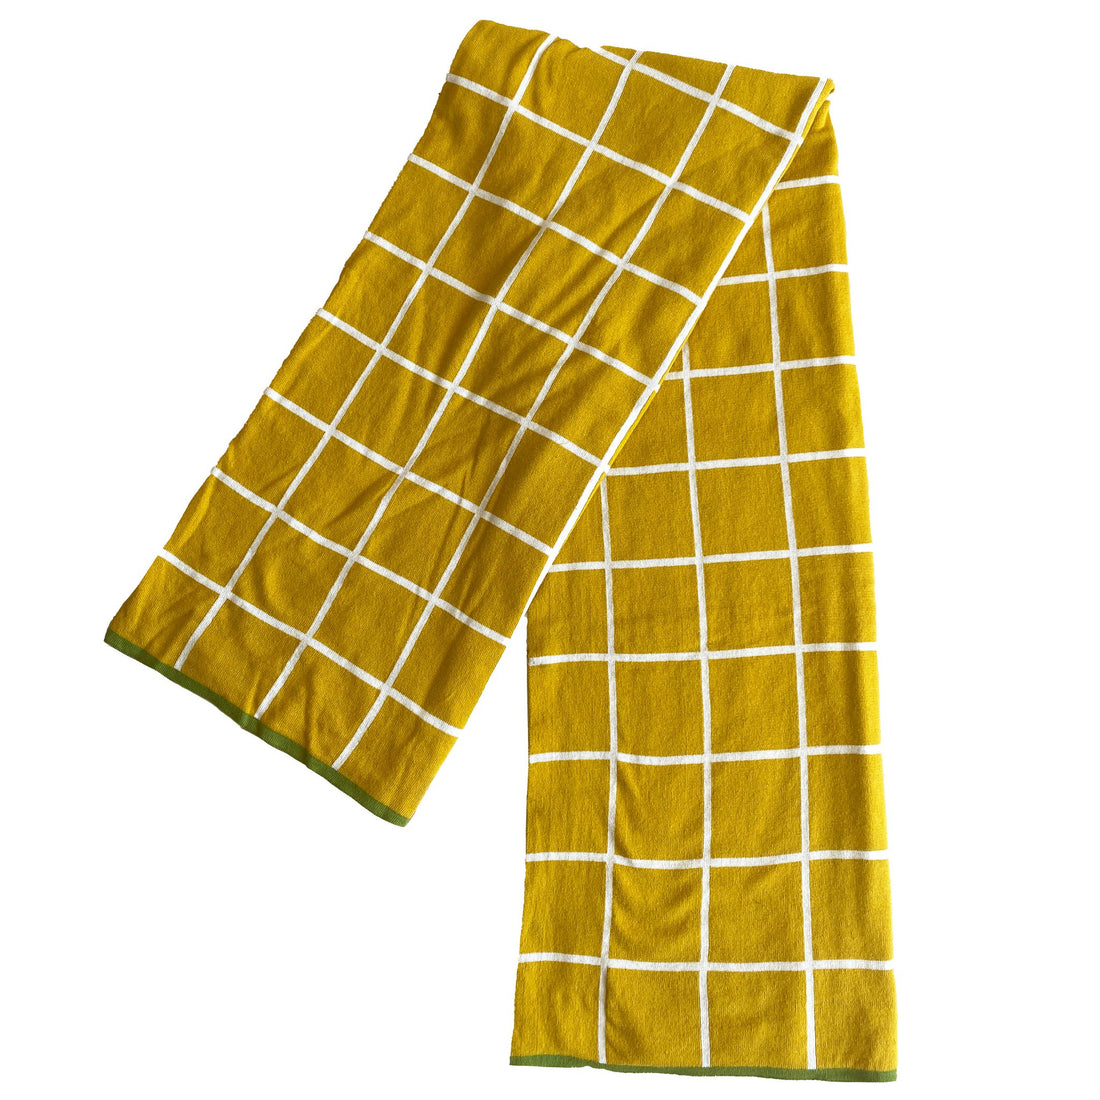 Todden blanket yellow, soft cotton knit